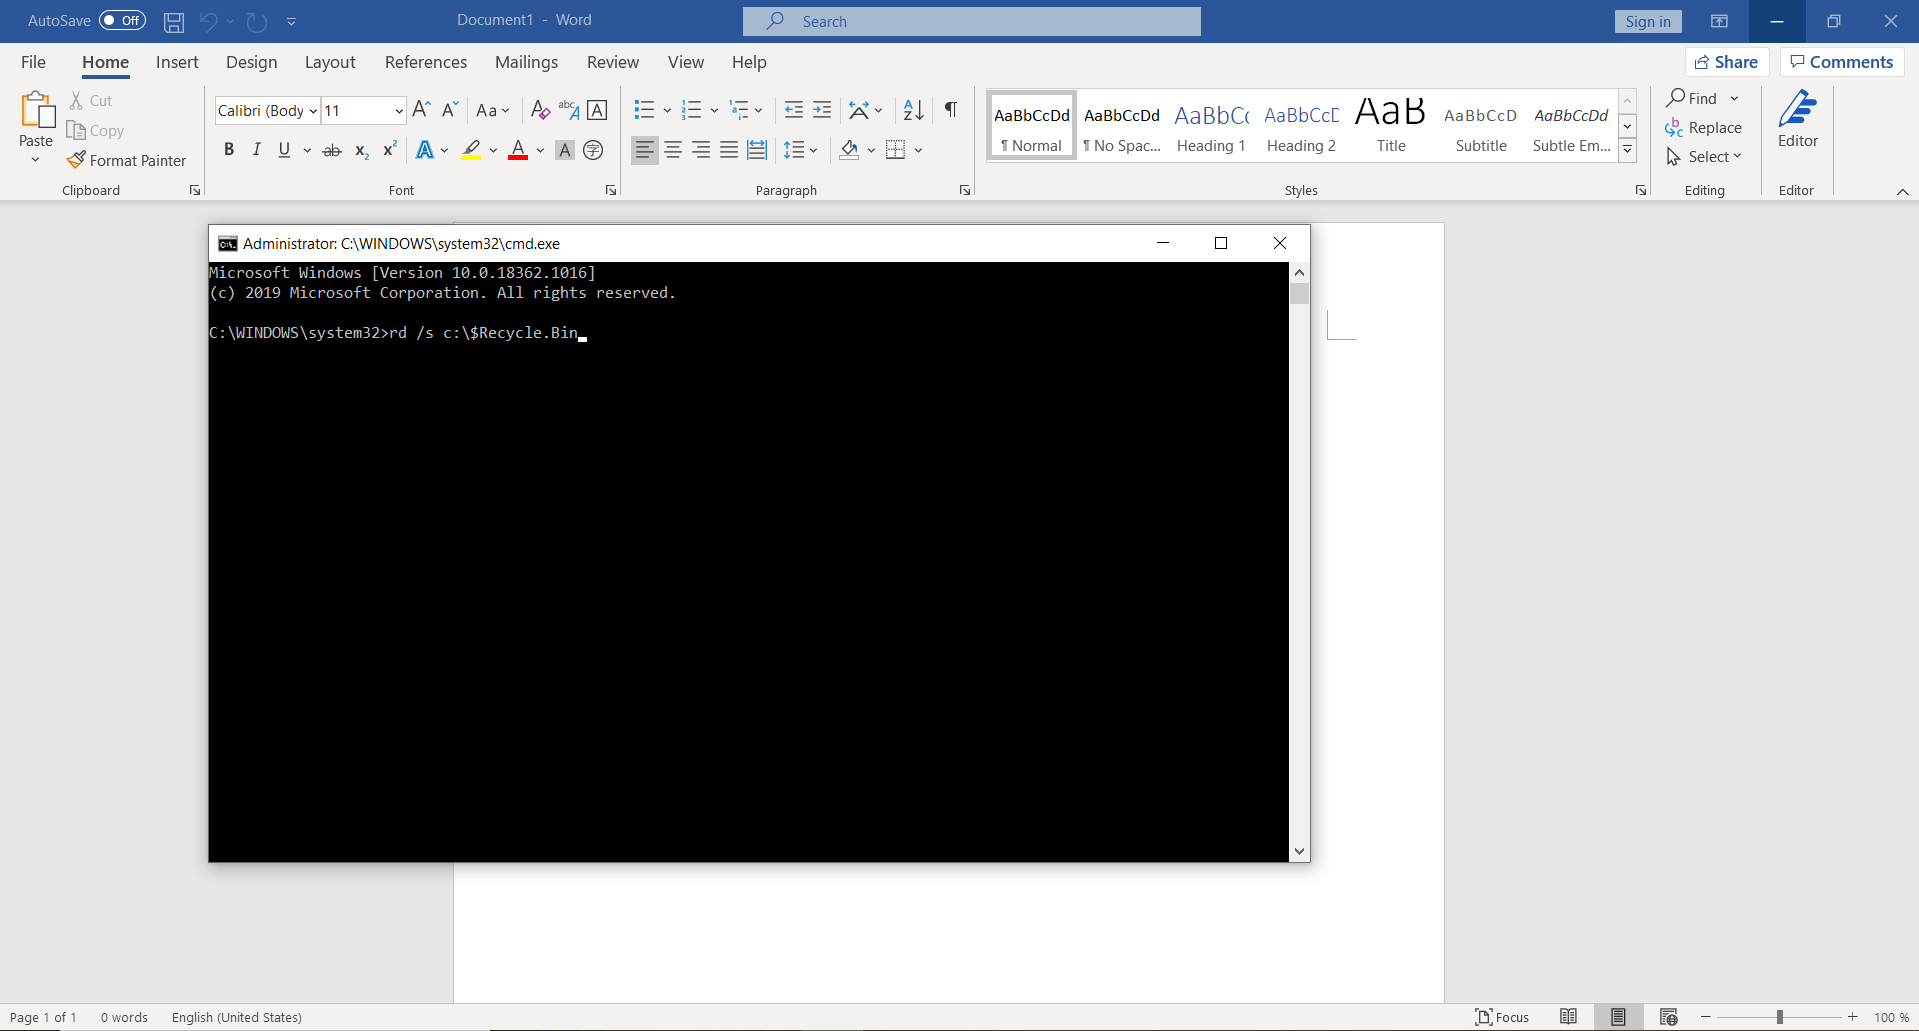 Emptying the Recycle Bin using the command prompt window